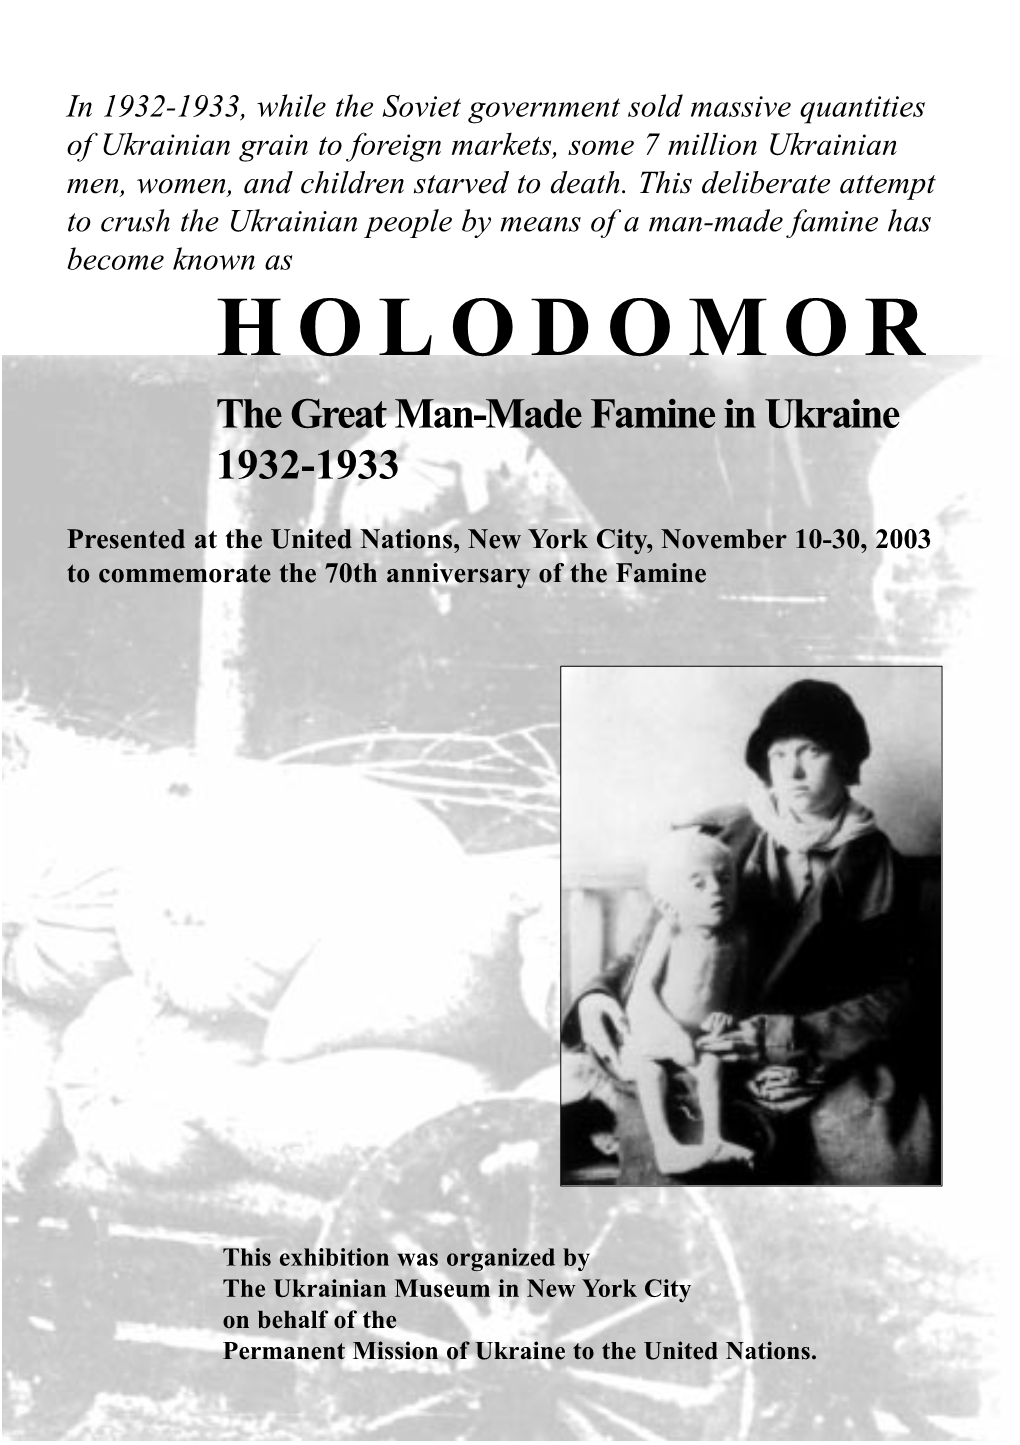 HOLODOMOR the Great Man-Made Famine in Ukraine 1932-1933